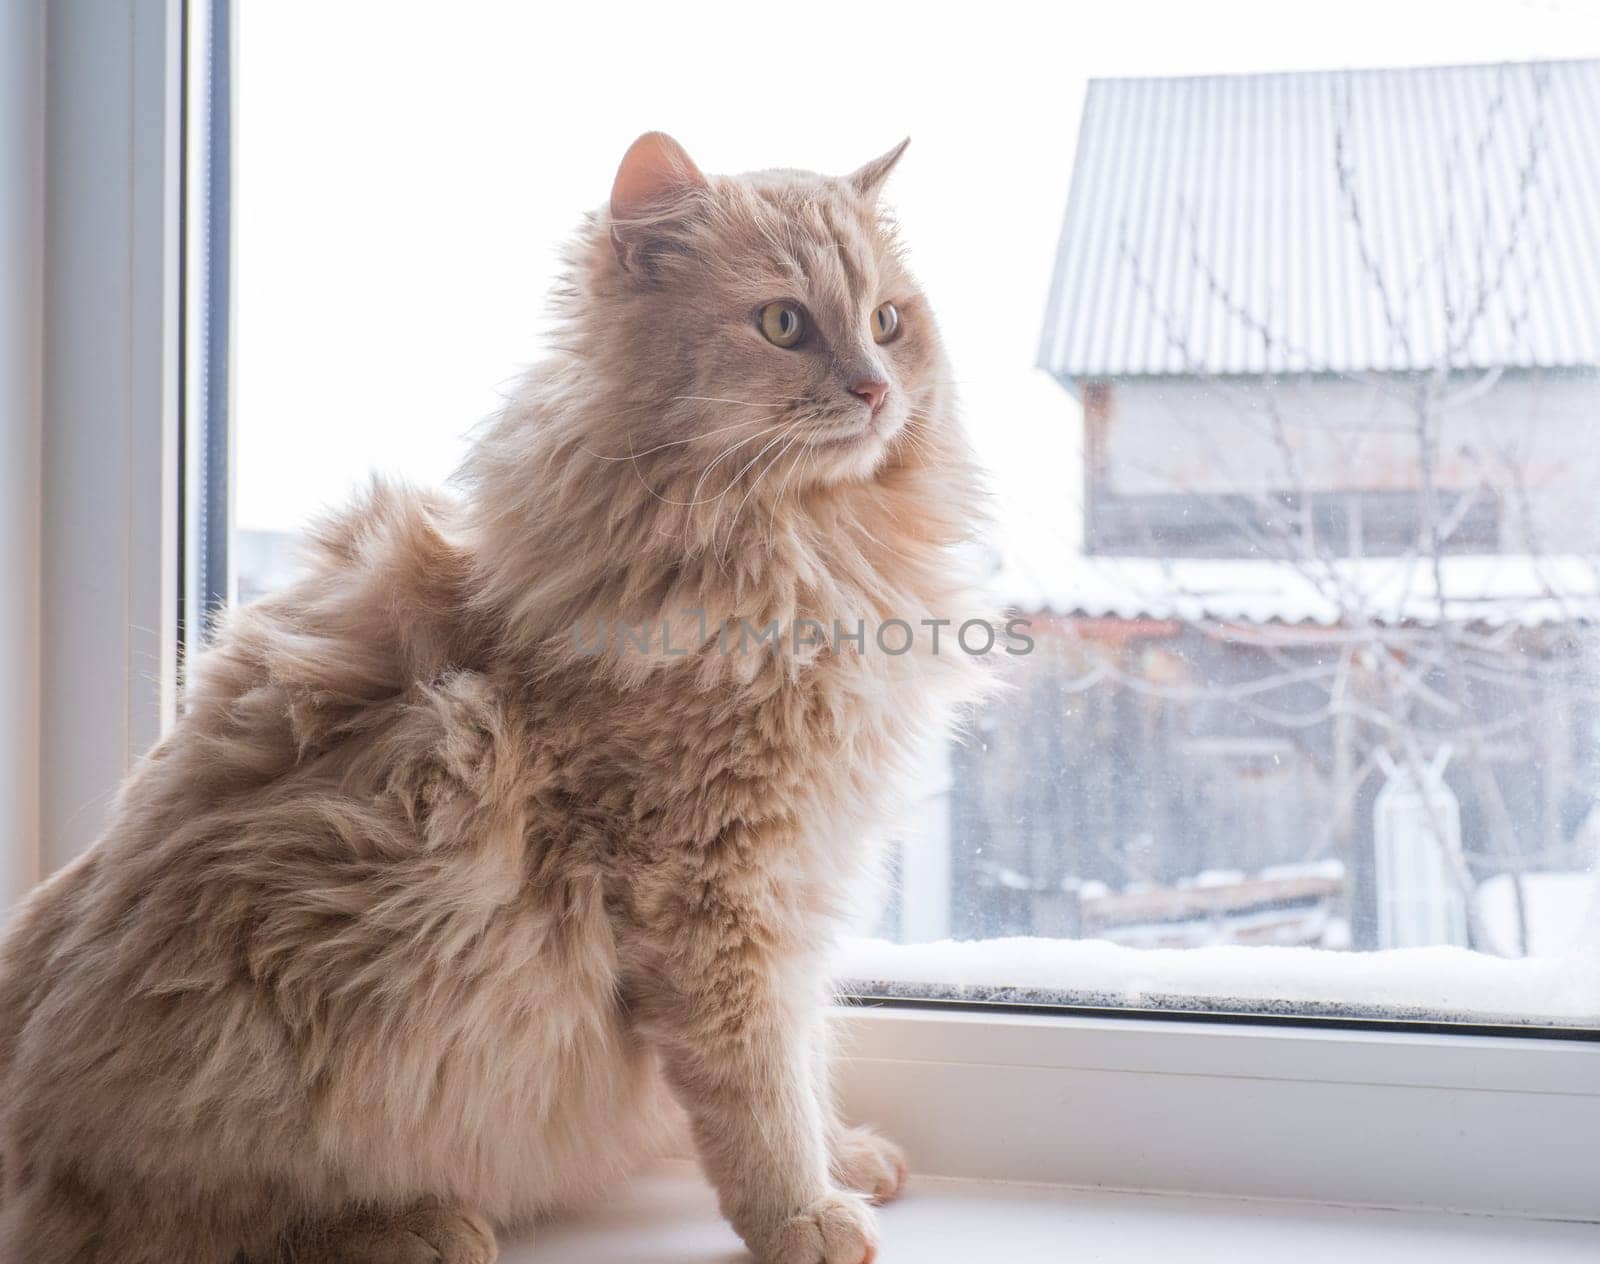 Red fluffy cat sits on the windowsill and looks out the window.